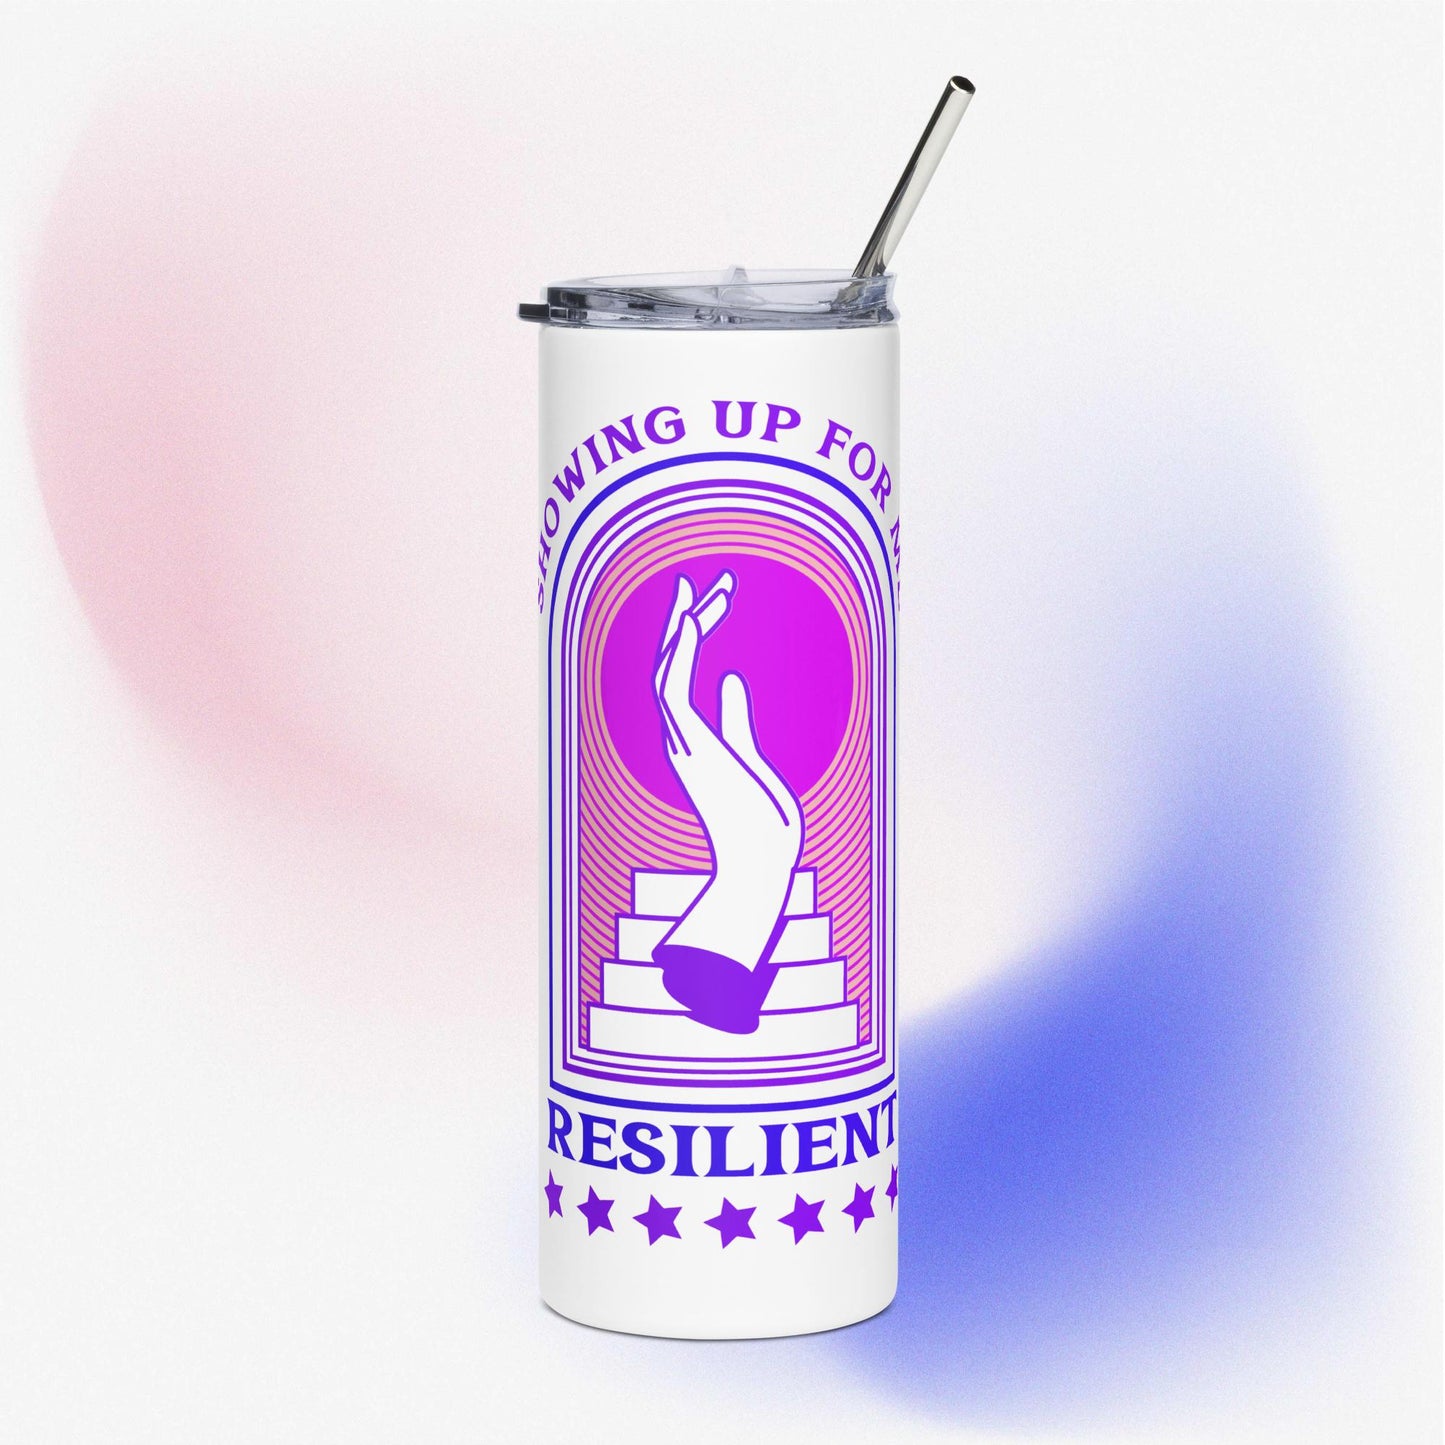 Showing Up Resilient: Stainless steel tumbler